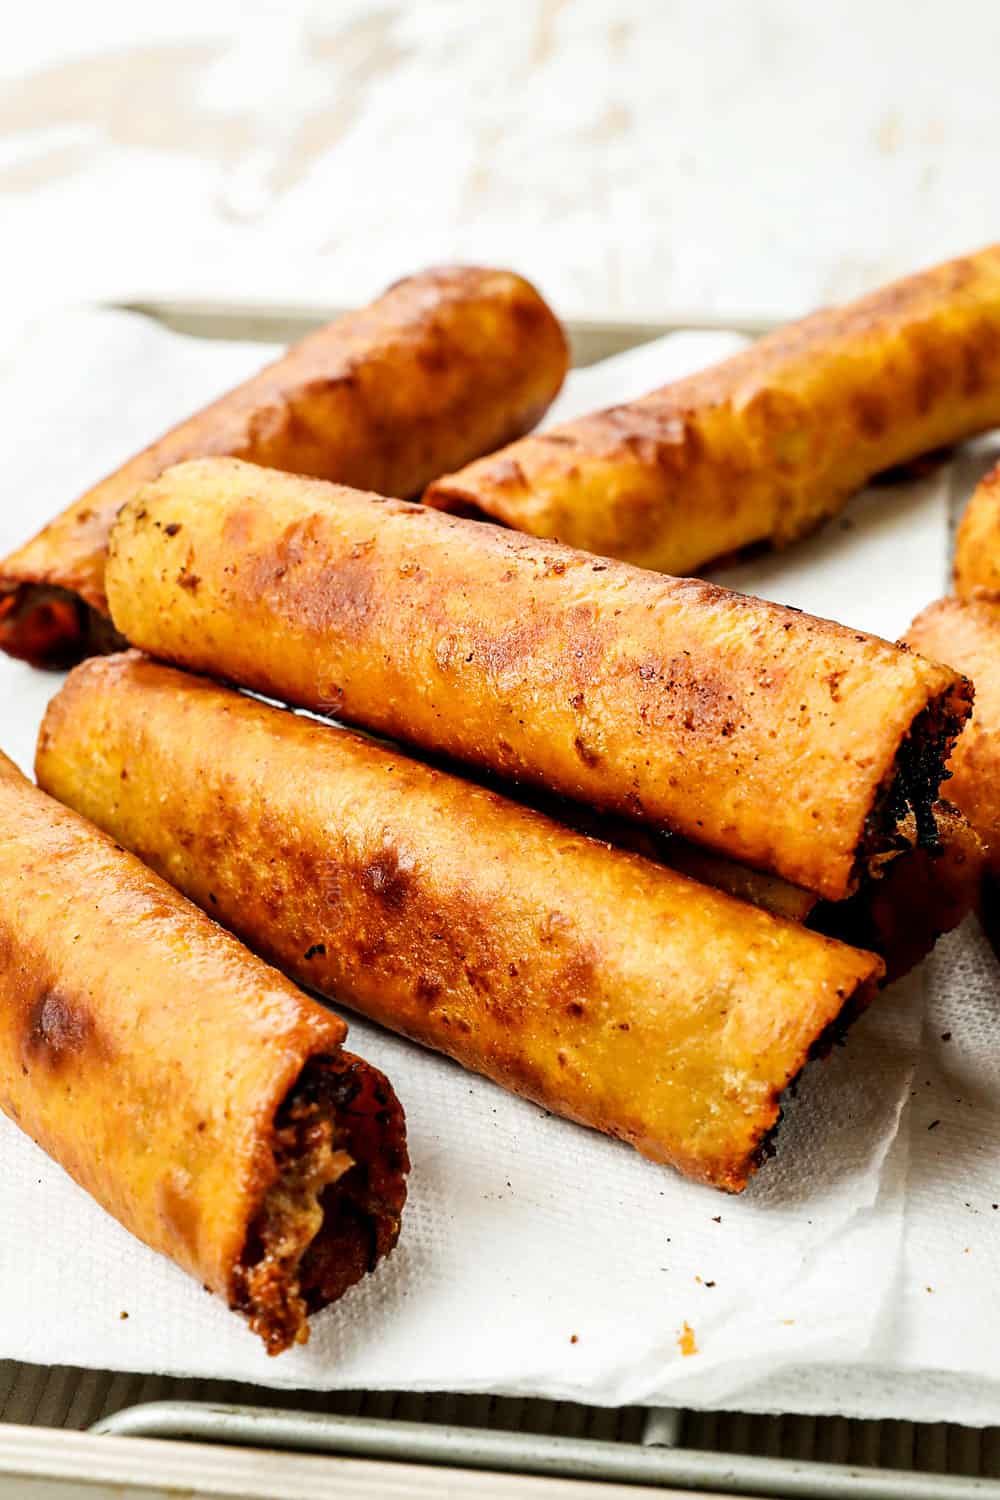 taquitos recipe stacked on paper towels showing how golden and crispy they are